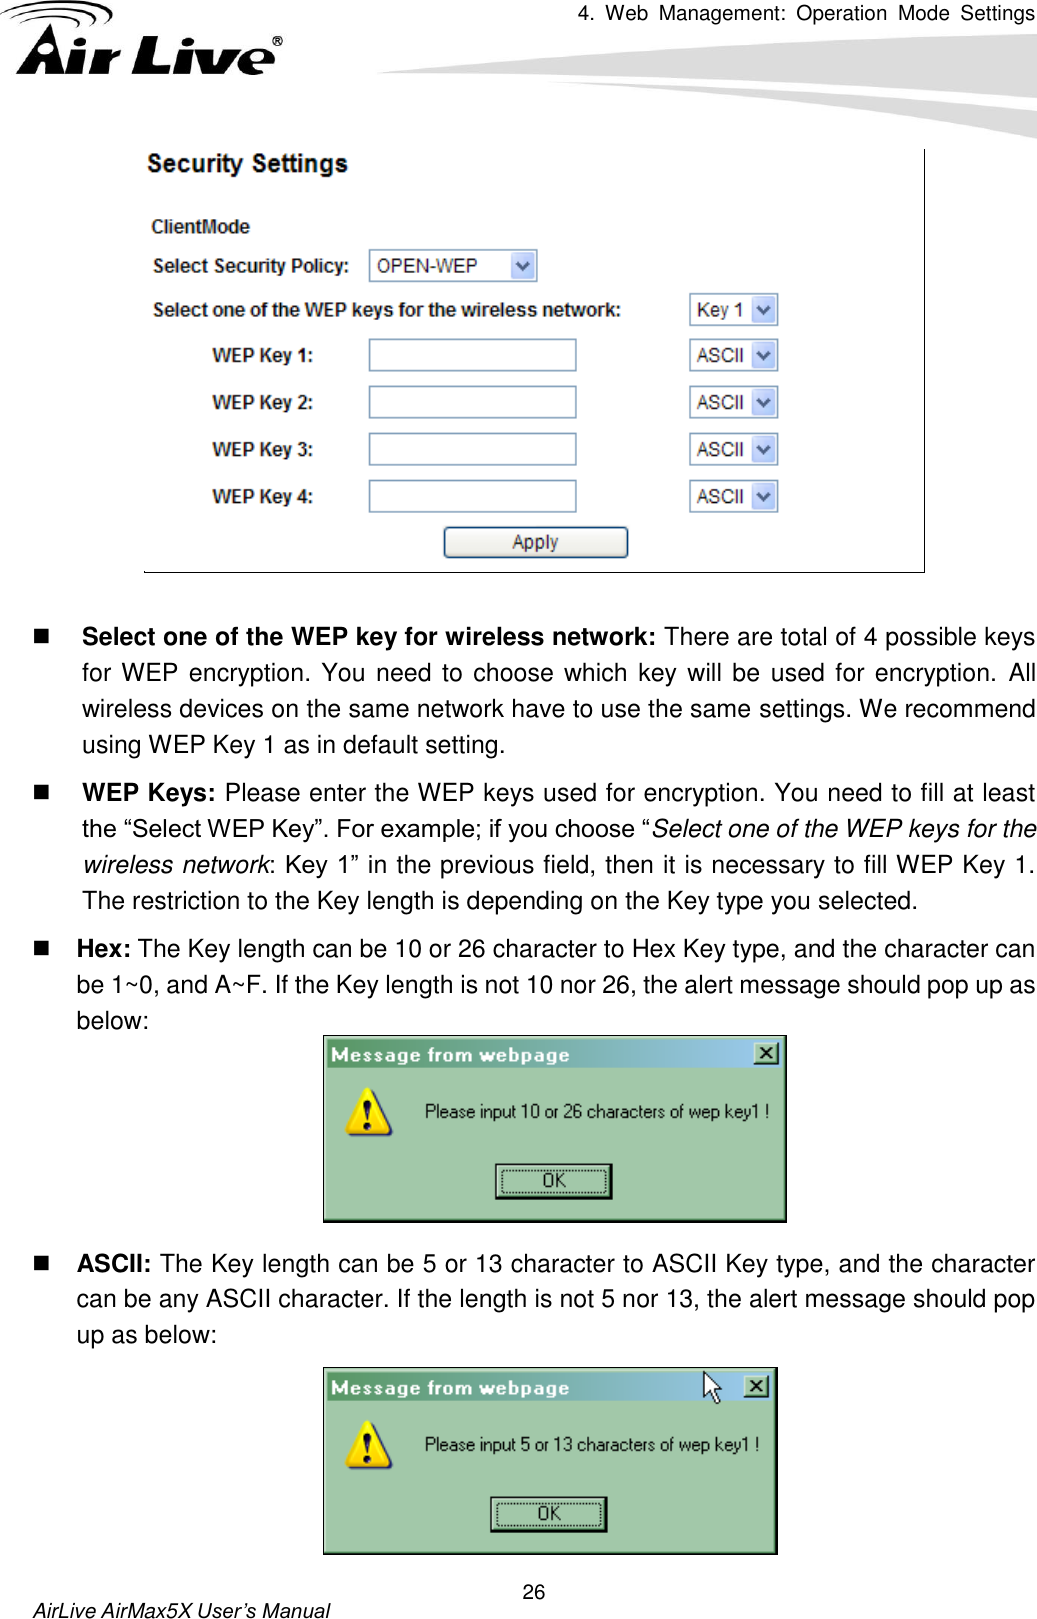 4.  Web  Management:  Operation  Mode  Settings   AirLive AirMax5X User’s Manual 26    Select one of the WEP key for wireless network: There are total of 4 possible keys for WEP encryption. You need to choose which key will be used for encryption. All wireless devices on the same network have to use the same settings. We recommend using WEP Key 1 as in default setting.  WEP Keys: Please enter the WEP keys used for encryption. You need to fill at least the “Select WEP Key”. For example; if you choose “Select one of the WEP keys for the wireless network: Key 1” in the previous field, then it is necessary to fill WEP Key 1. The restriction to the Key length is depending on the Key type you selected.  Hex: The Key length can be 10 or 26 character to Hex Key type, and the character can be 1~0, and A~F. If the Key length is not 10 nor 26, the alert message should pop up as below:      ASCII: The Key length can be 5 or 13 character to ASCII Key type, and the character can be any ASCII character. If the length is not 5 nor 13, the alert message should pop up as below:    